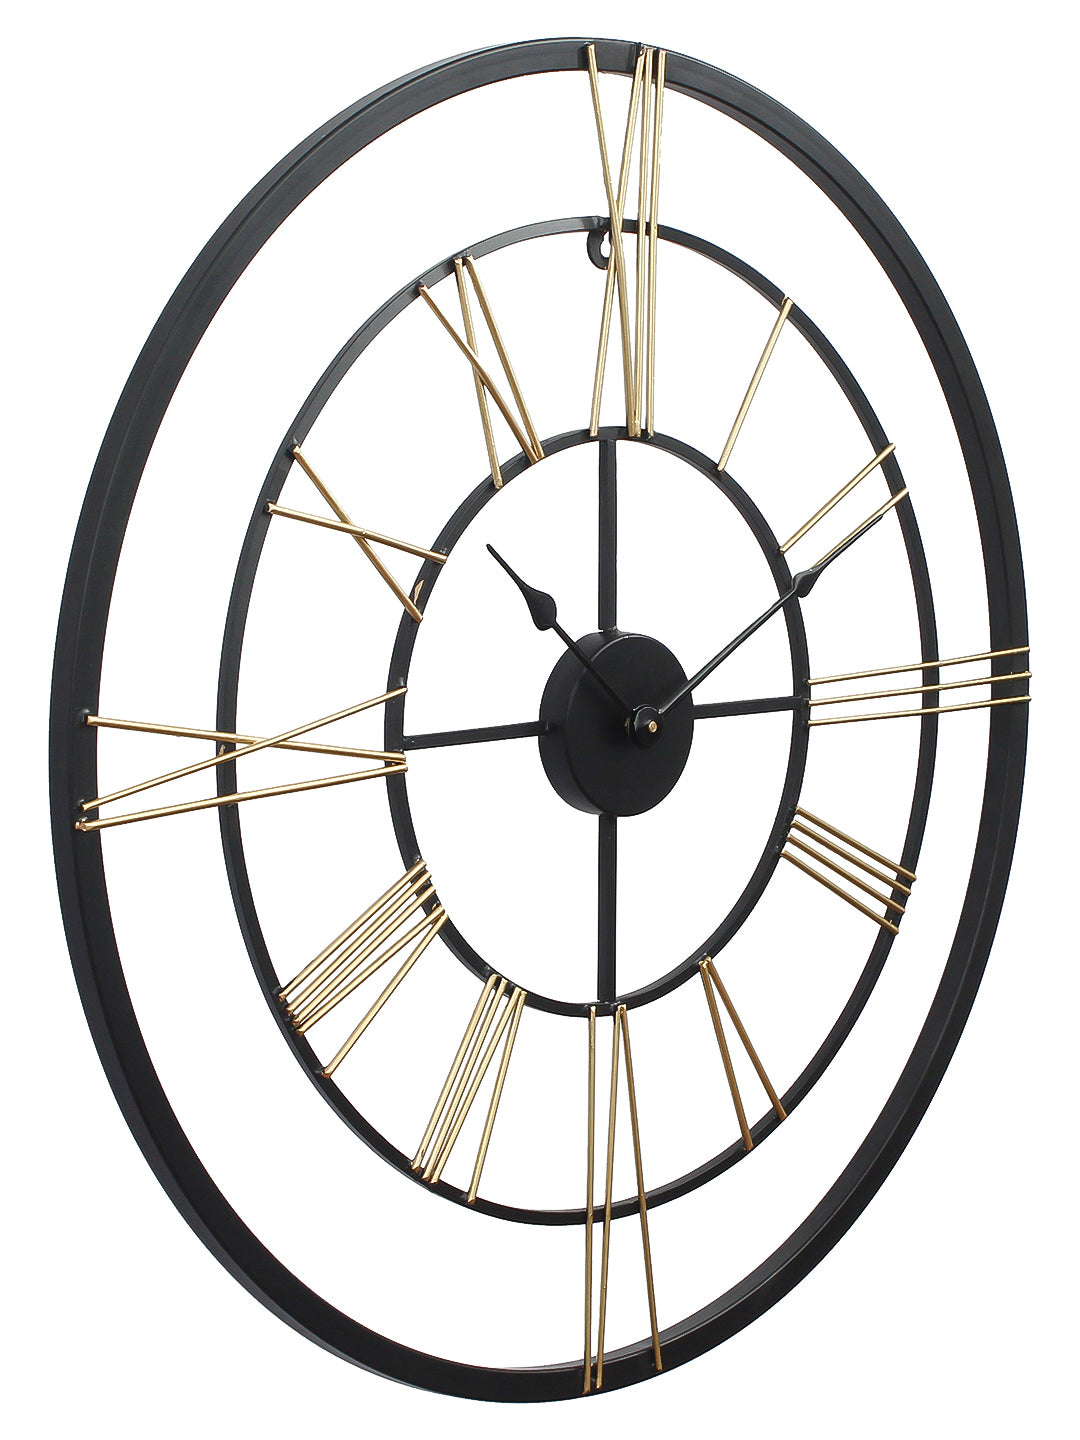 Black Iron Base with Double Golden Roman Figures Round Hand-Crafted Analog Wall Clock Without Glass ( 64Cm x 64Cm ) 4